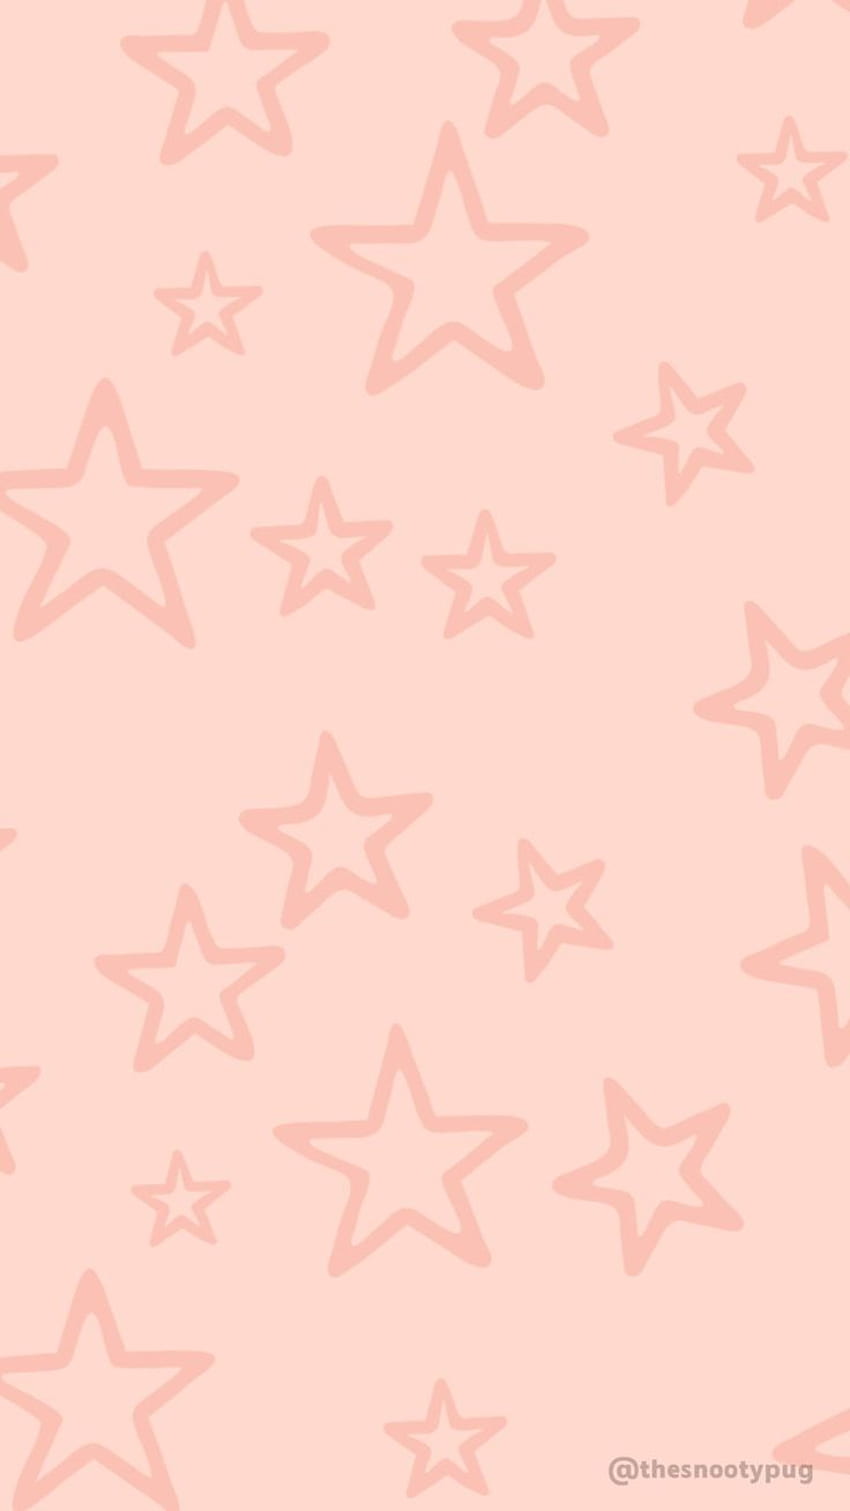 Trendy pink star iPhone background Instagram story ...